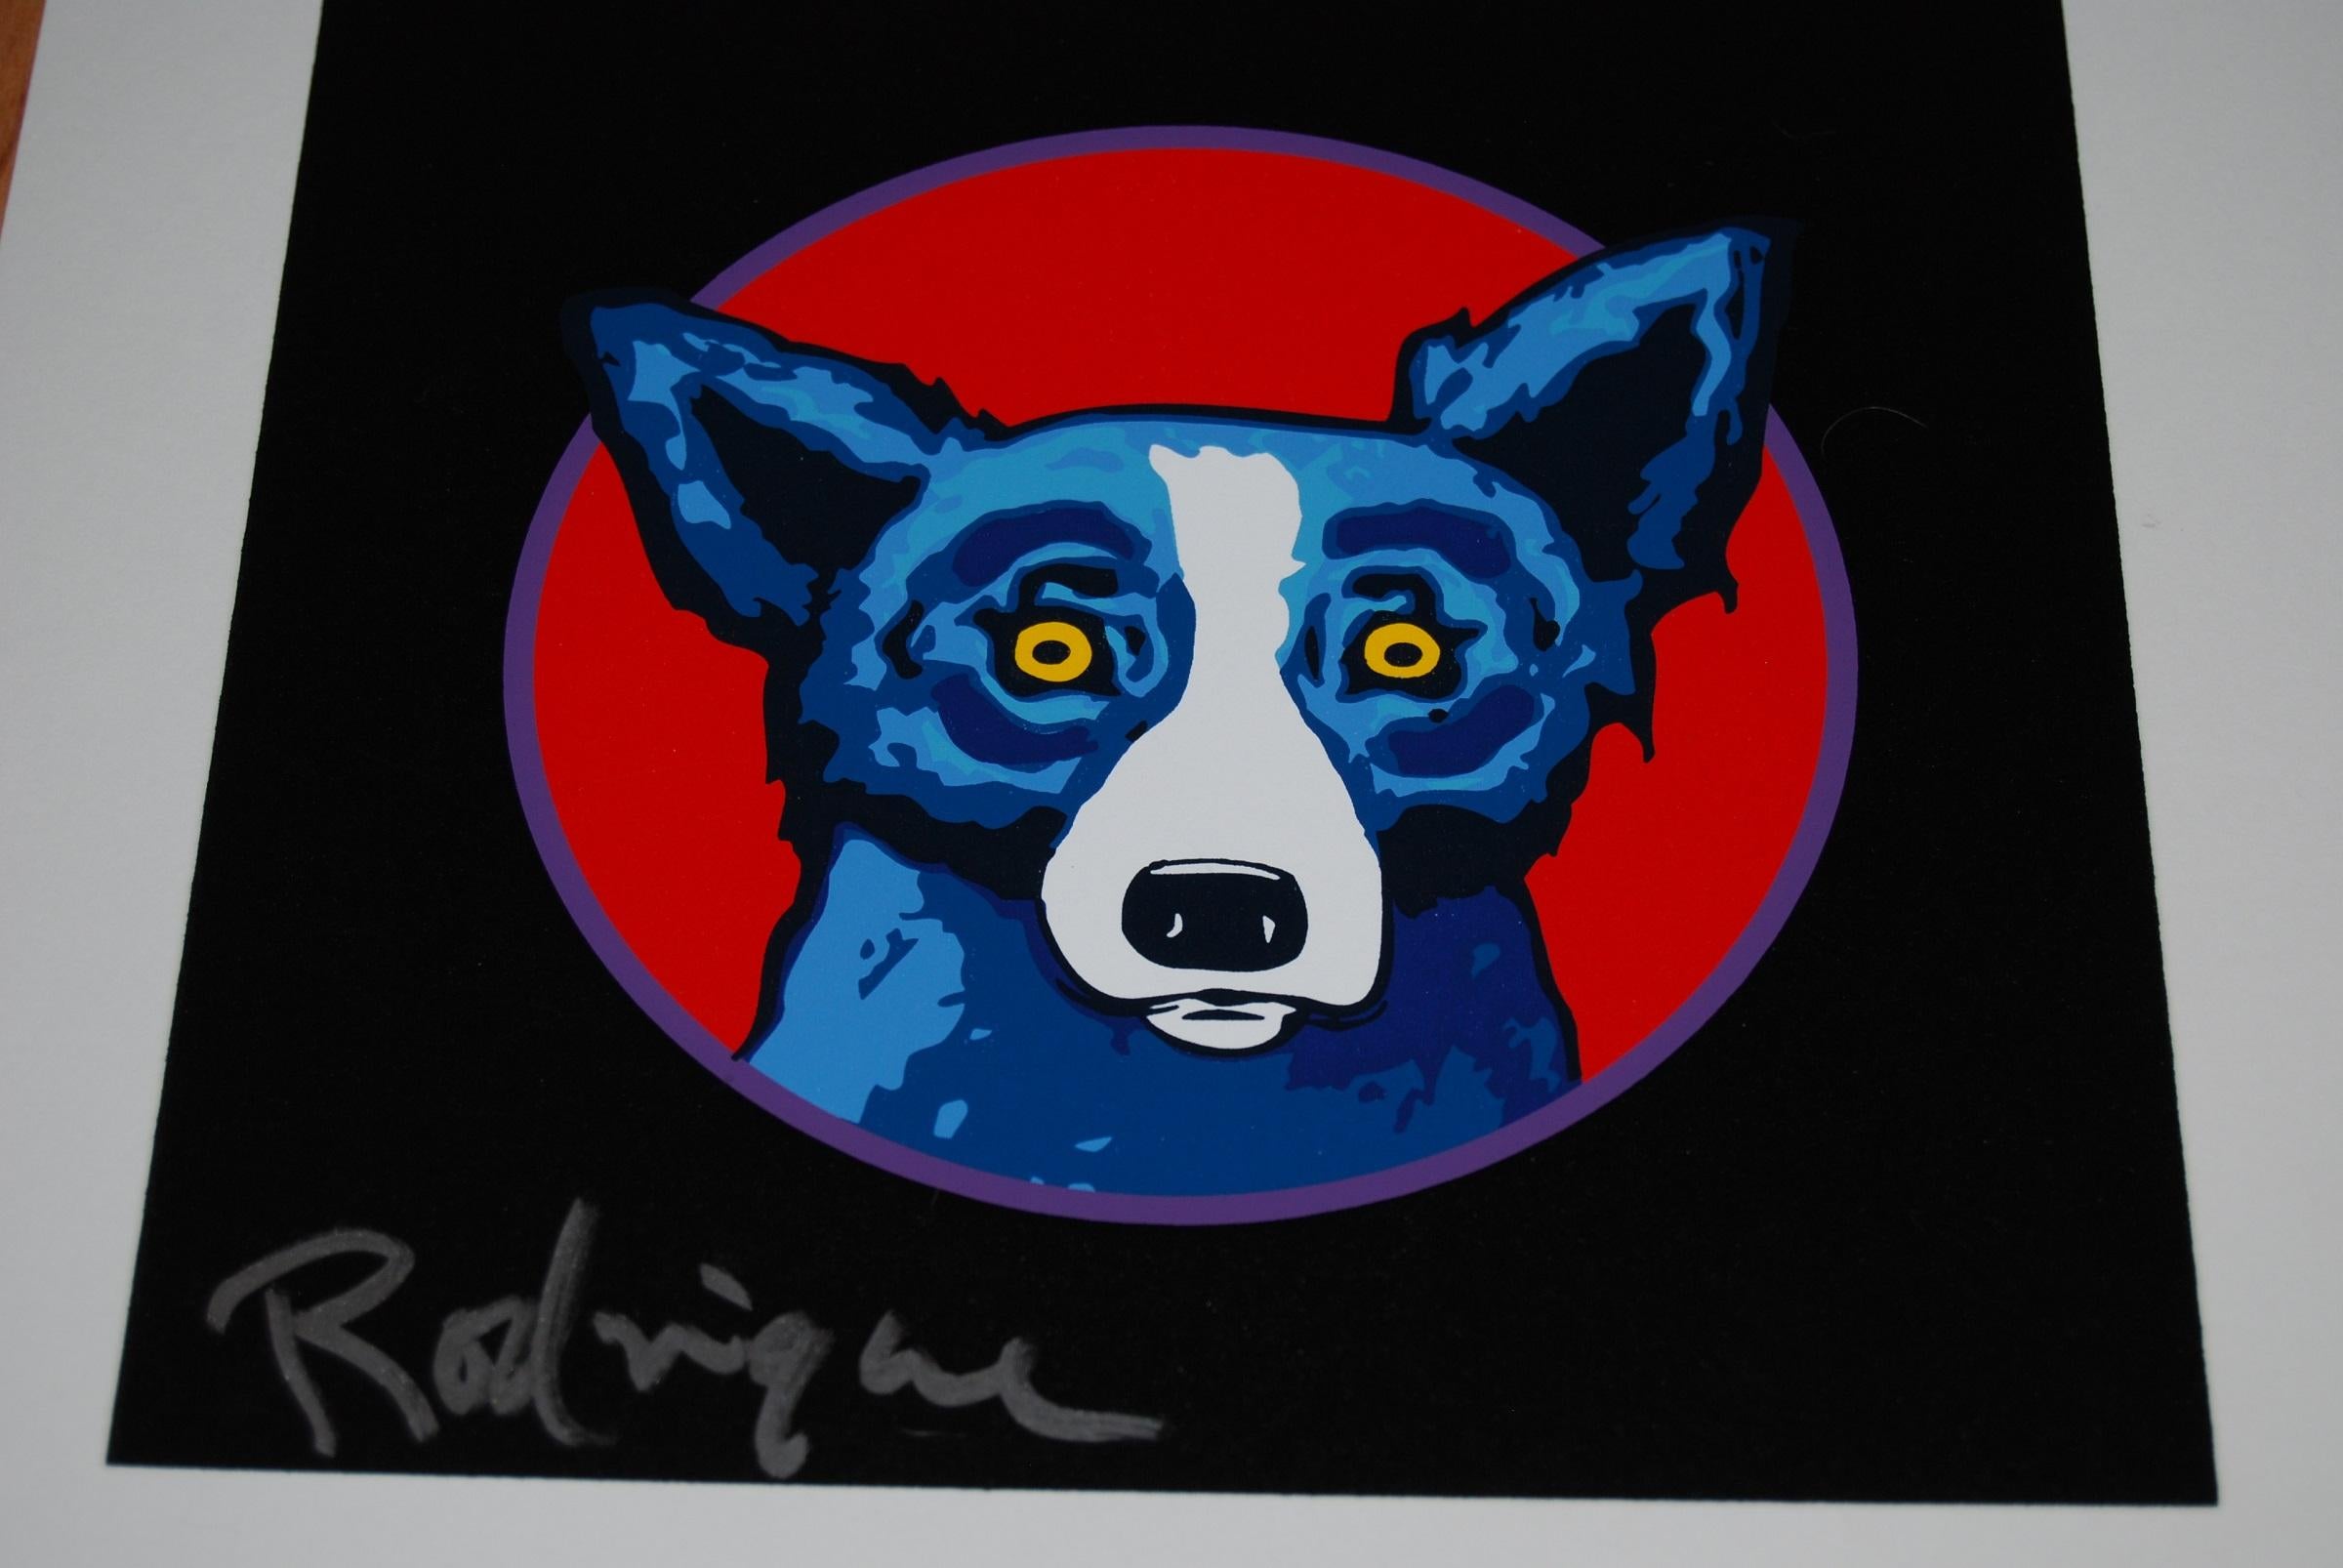 This Blue Dog work consists of 4 frames each with a dog and different colored backgrounds. One is a red background with a yellow center, one is purple background with a yellow center, one is a black background with a red center and one is a yellow